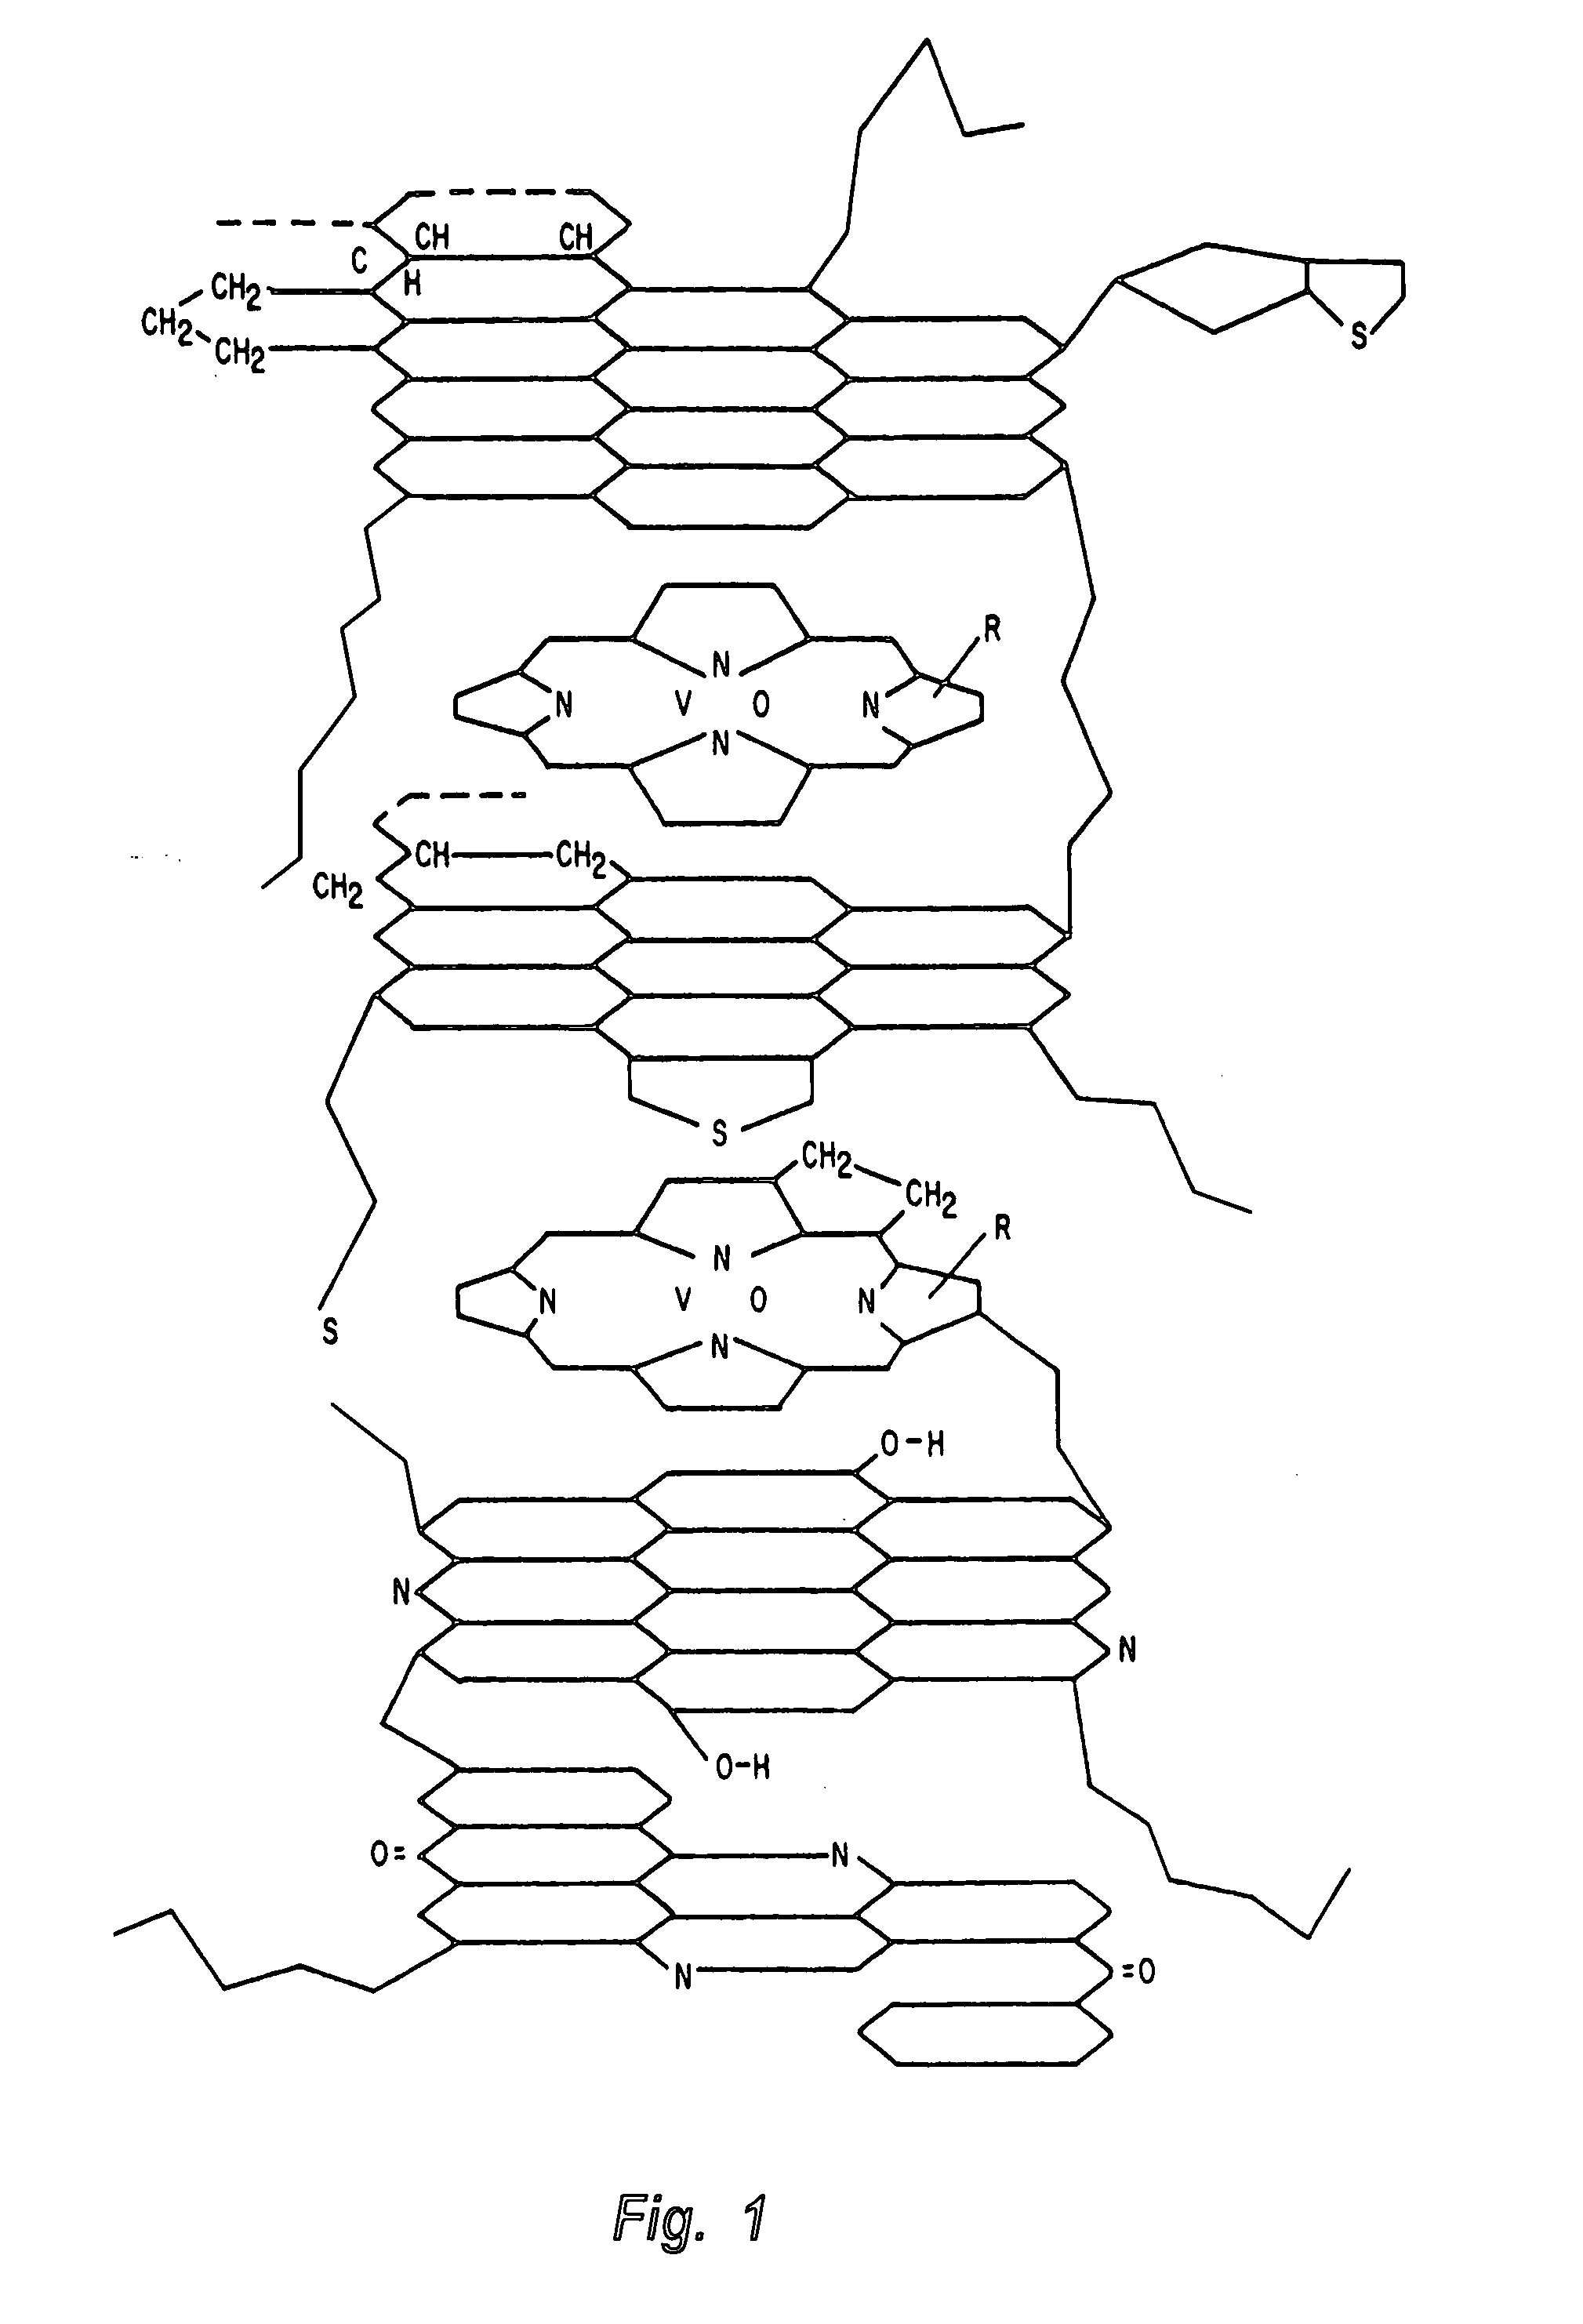 Hydroprocessing method and system for upgrading heavy oil using a colloidal or molecular catalyst